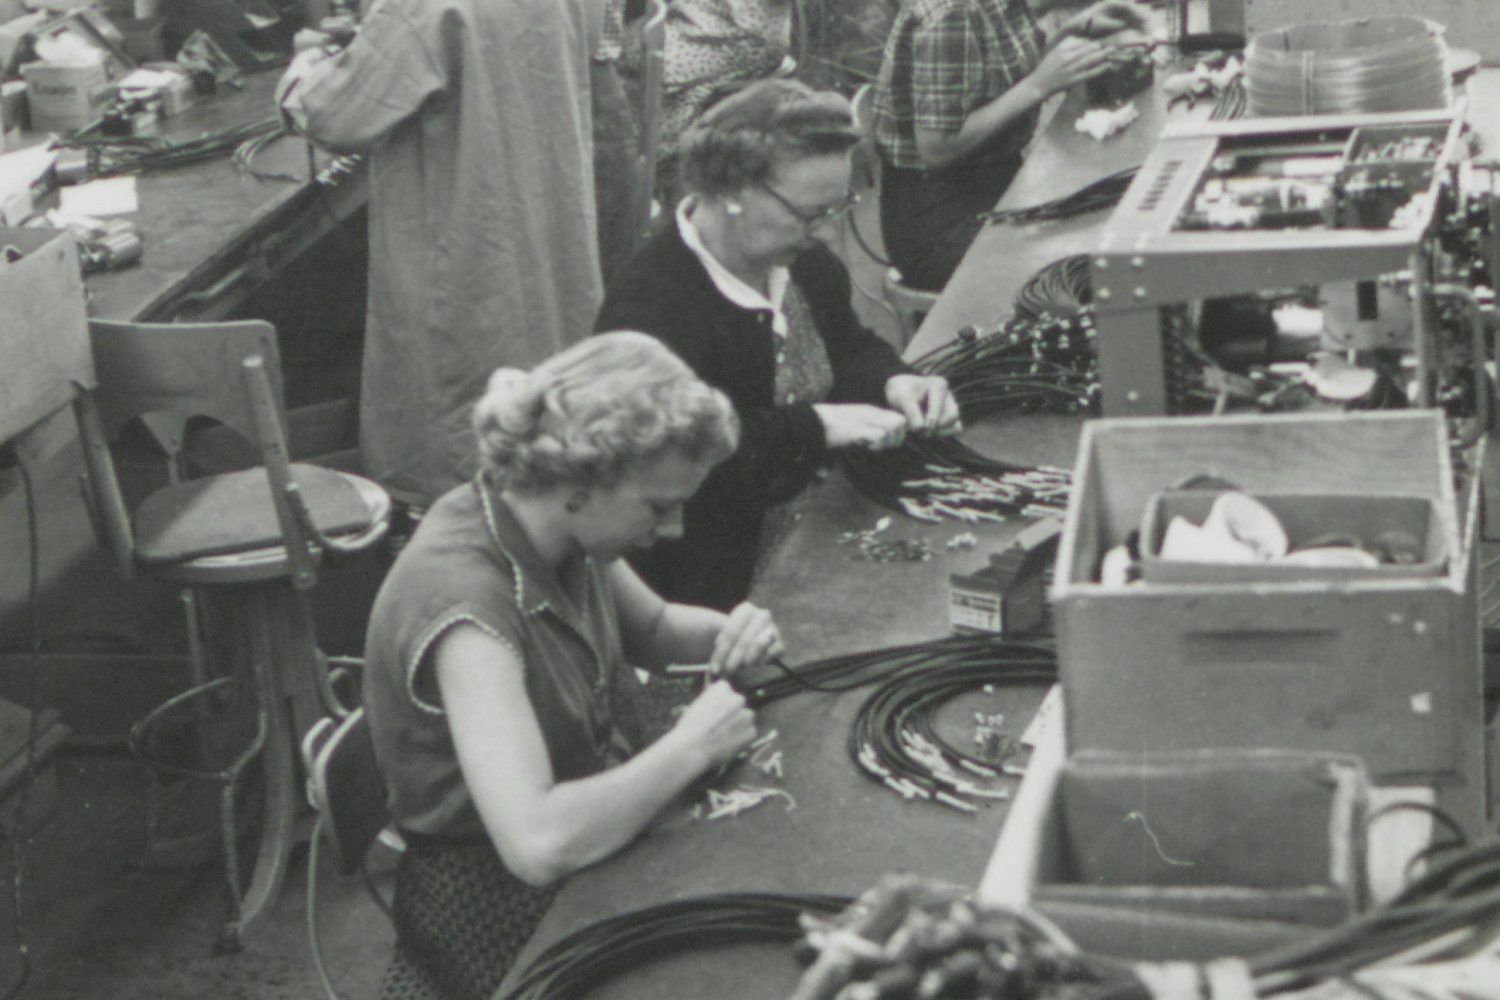 Photo of many women on Hewlett-Packard's production line in the 1940s or 1950s.